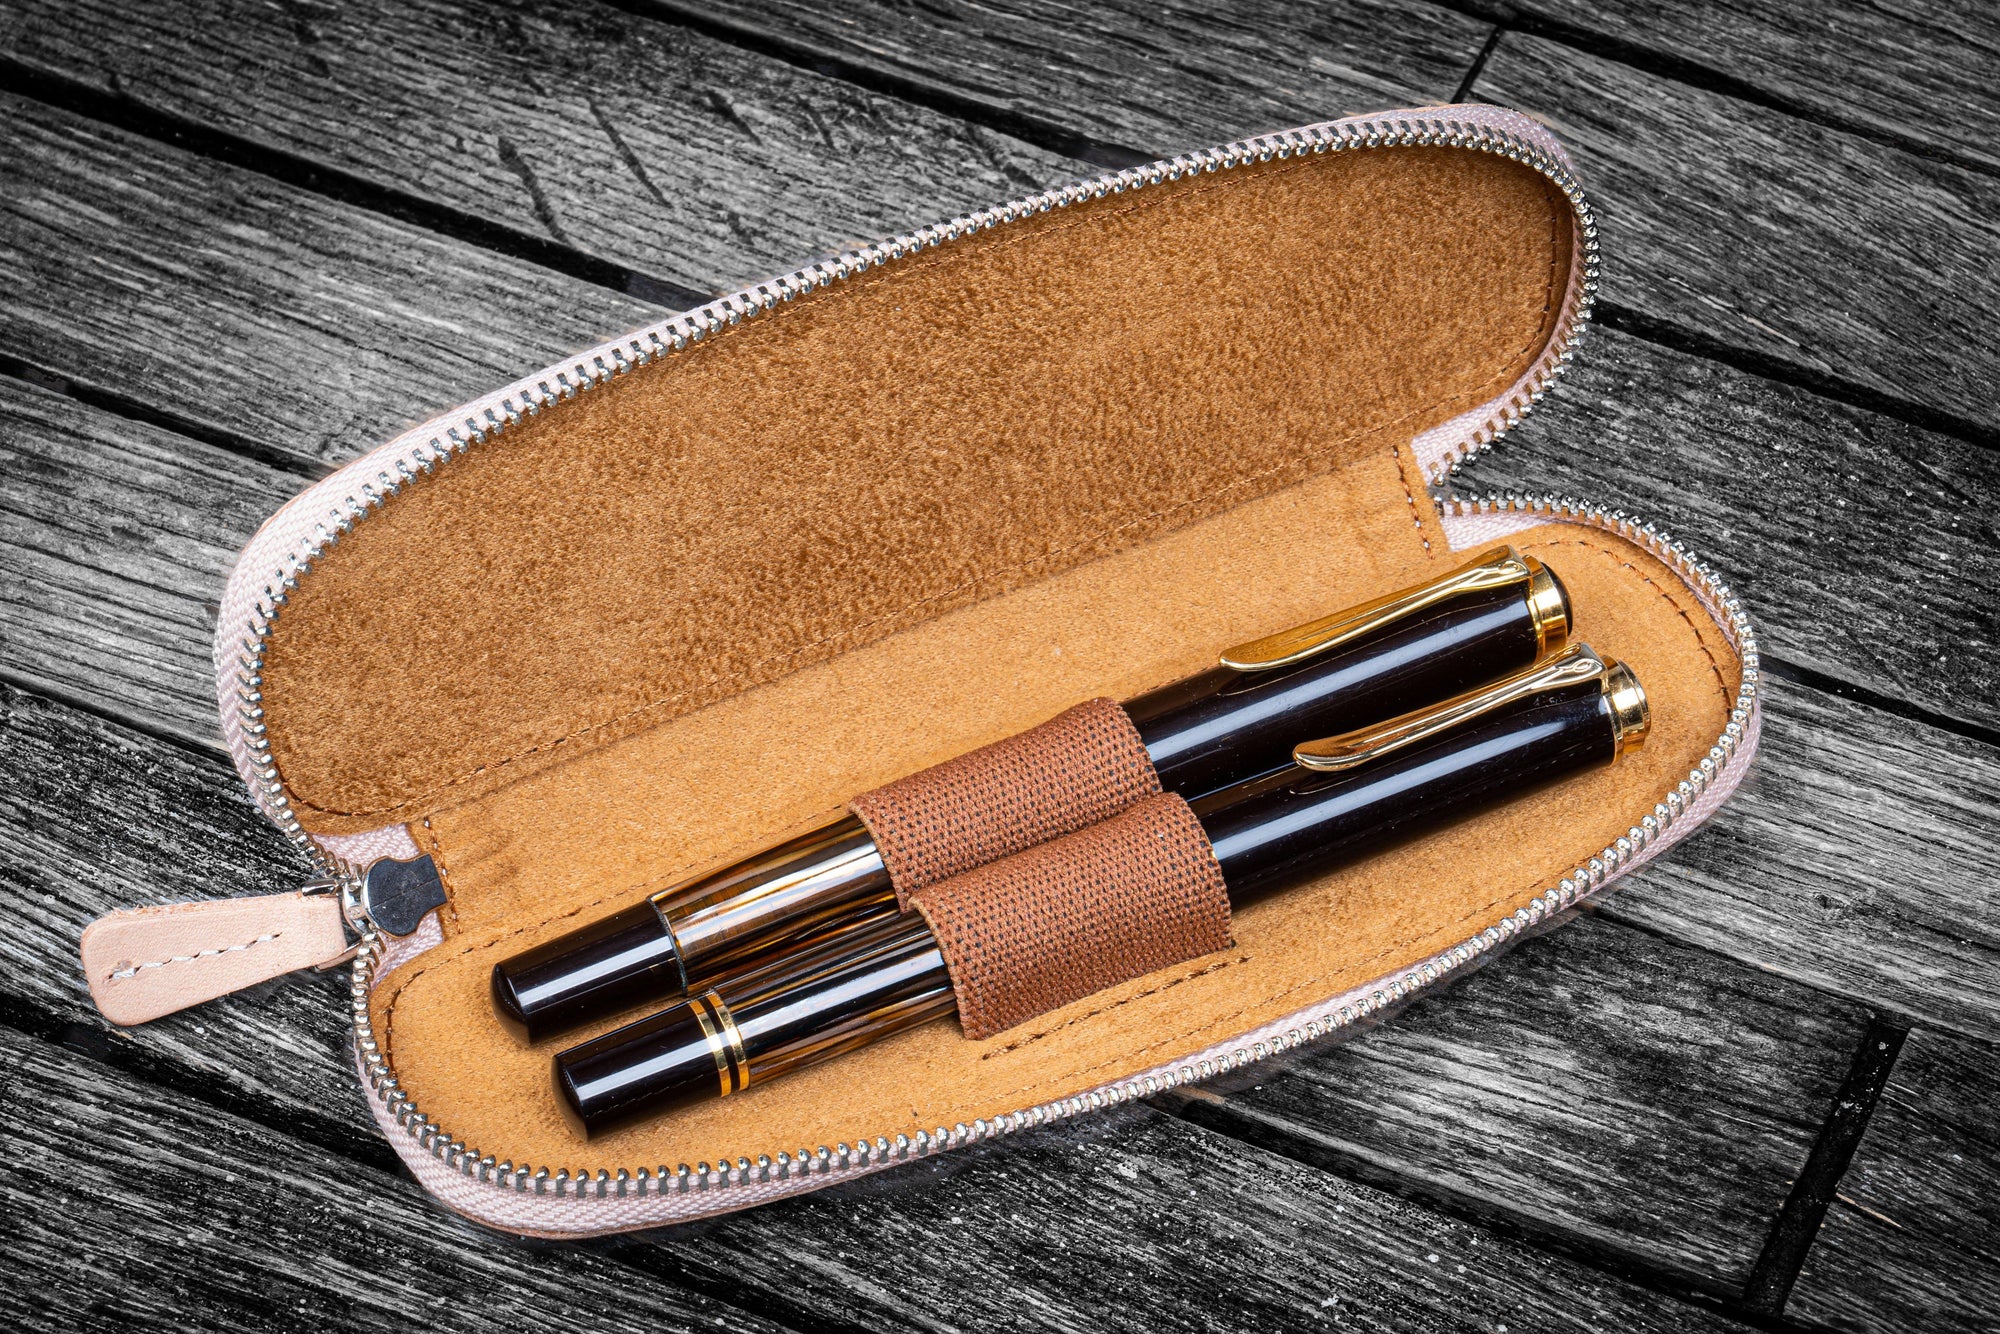 2 Pen Case Leather Pouch, Fountain Pen Case With 2 Slots, Fountain Pen  Holder Case, Pen Sleeve Two Pen, Work Anniversary Gift for Women 